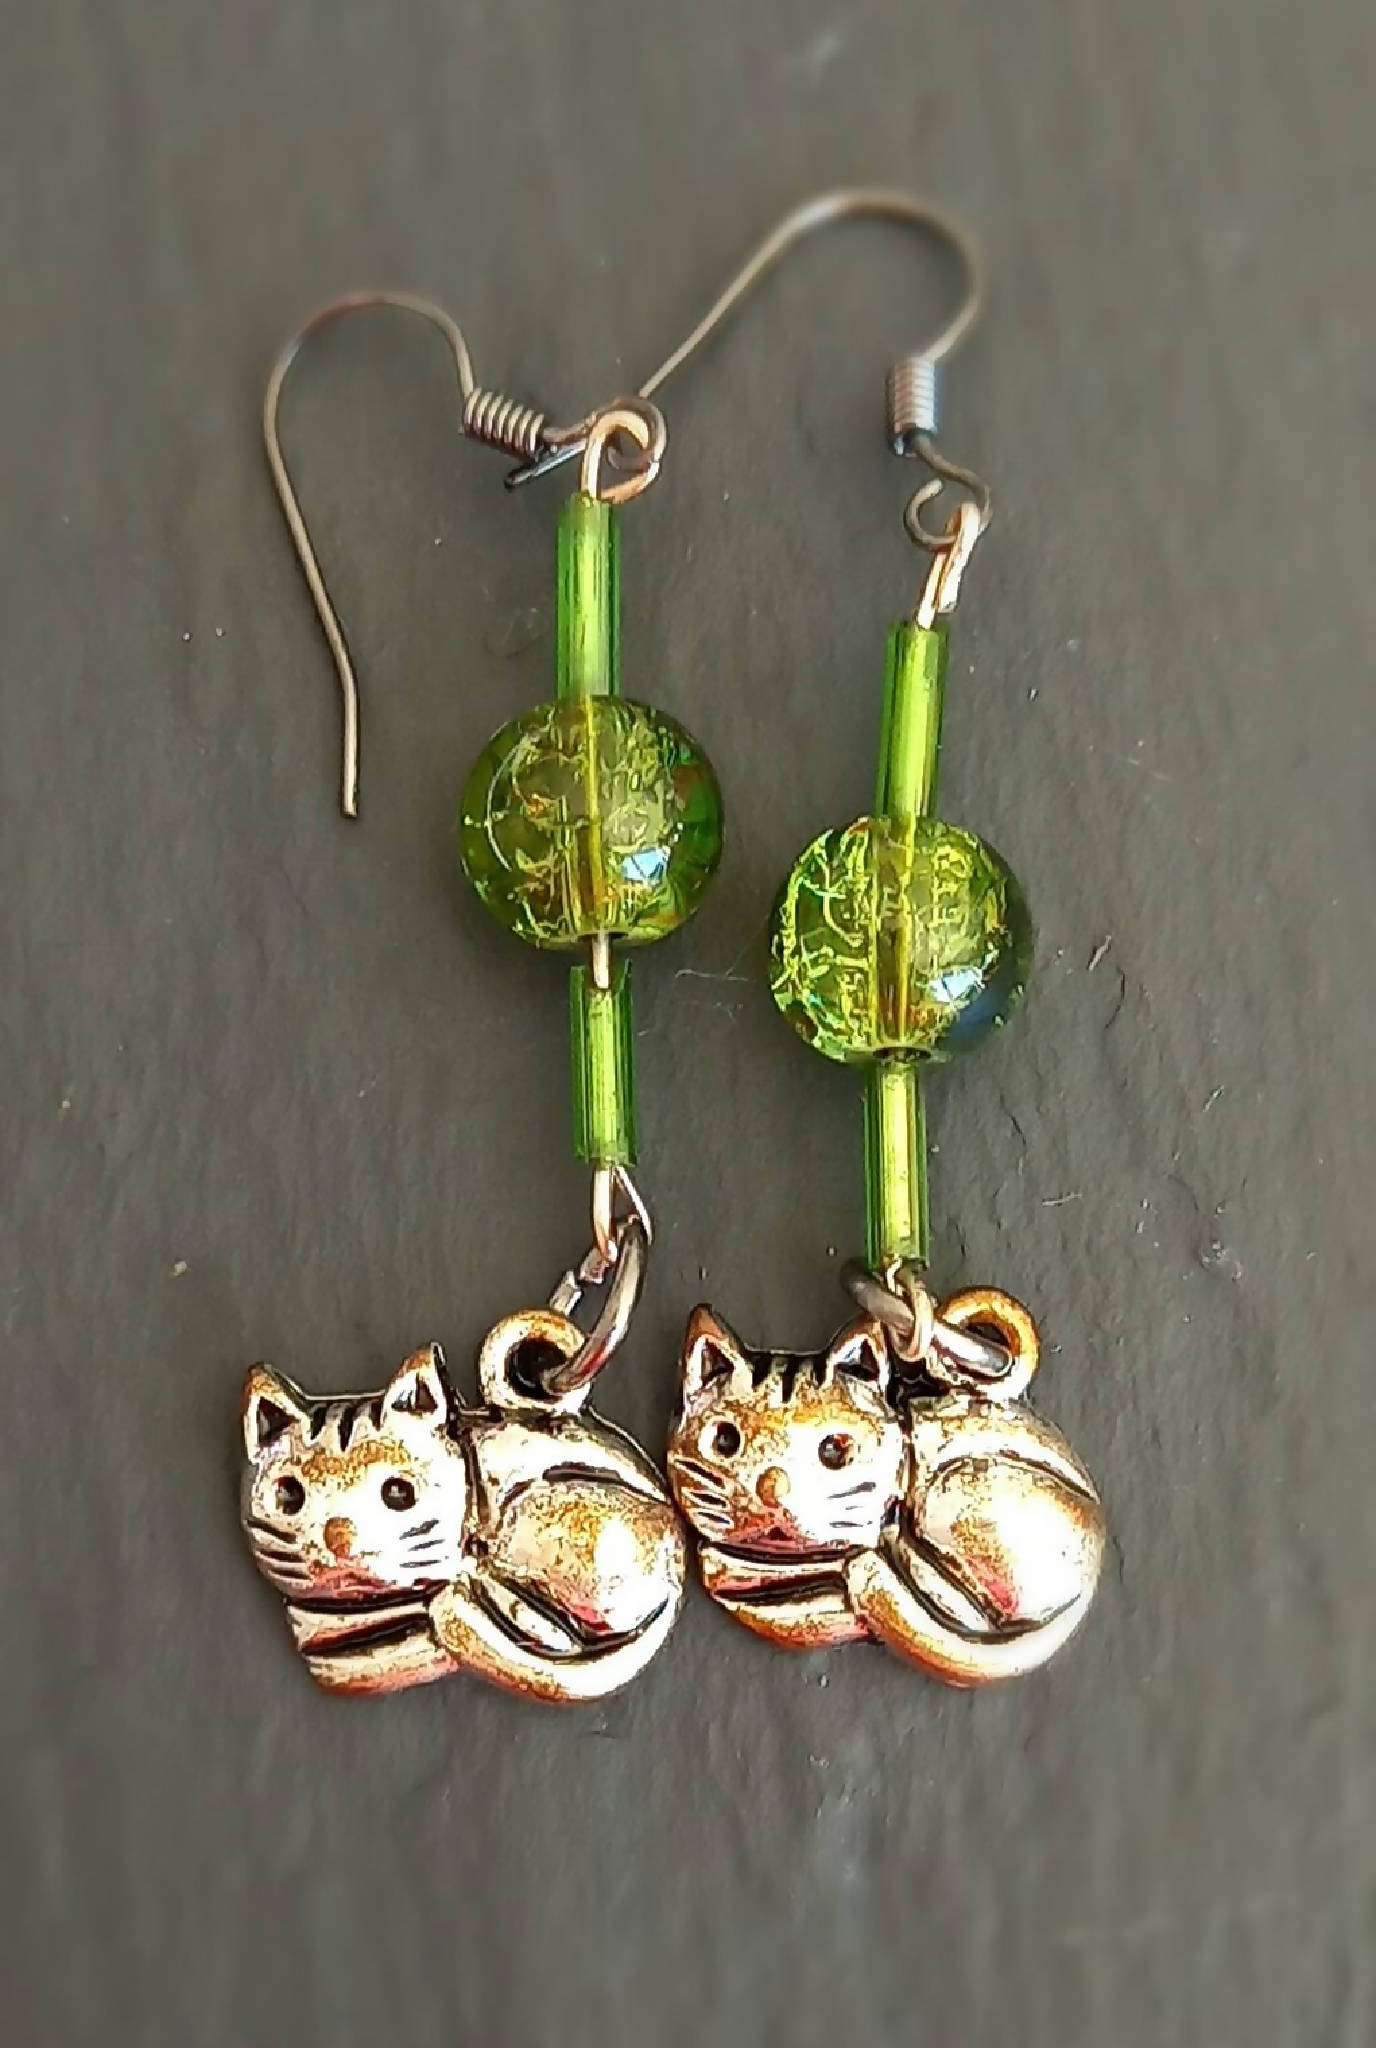 Earrings - Green and Silver Cat Charms